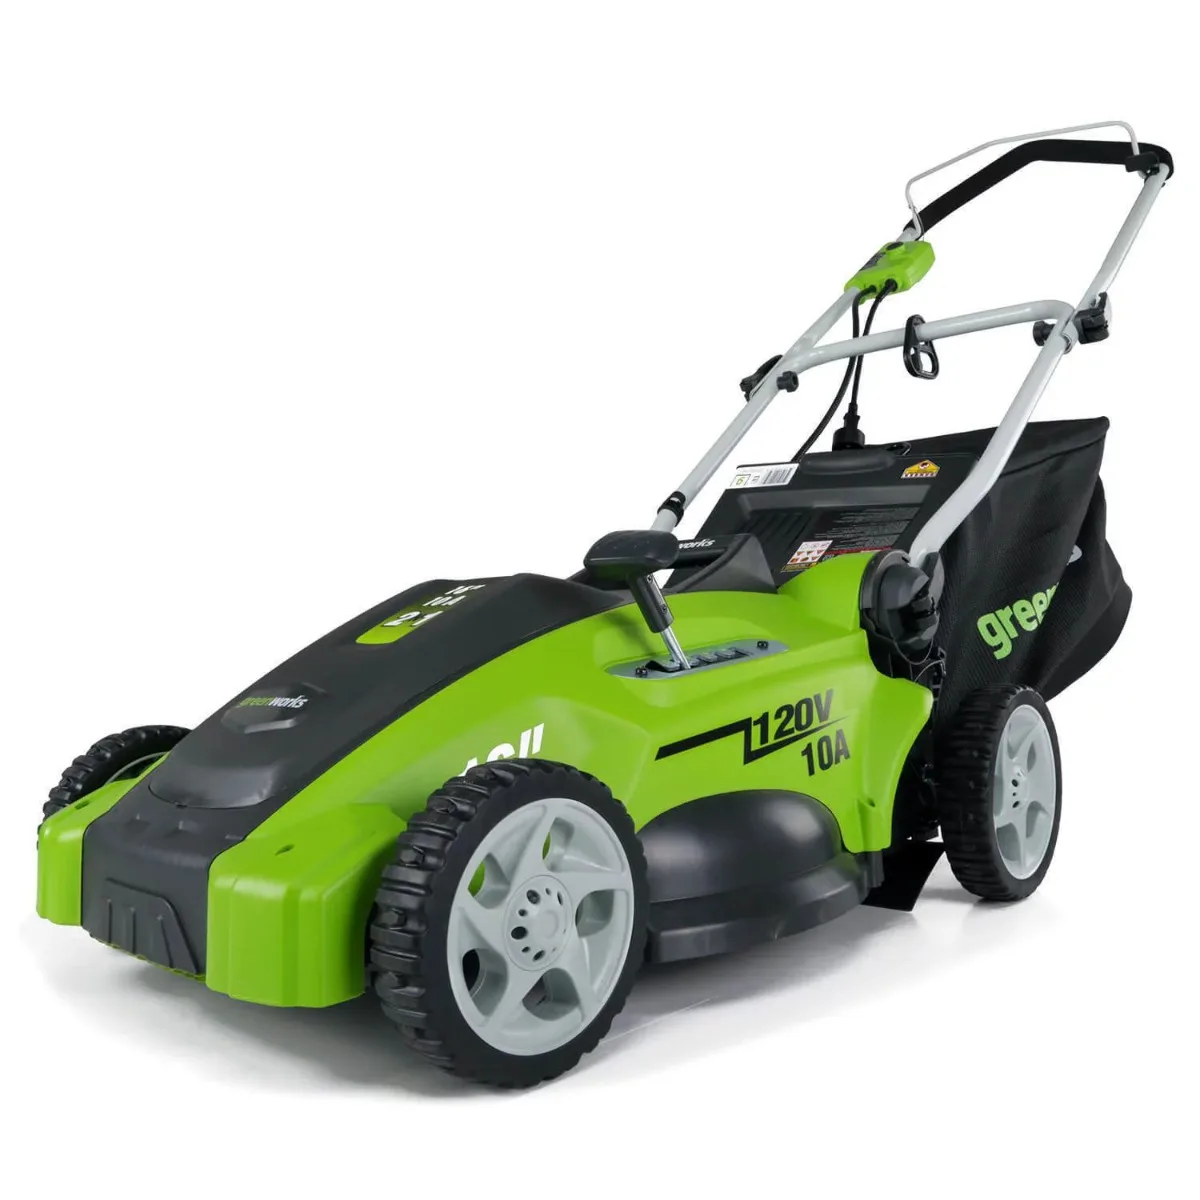 

10 Amp 16" Corded Electric Walk-Behind Push Lawn Mower, 25142